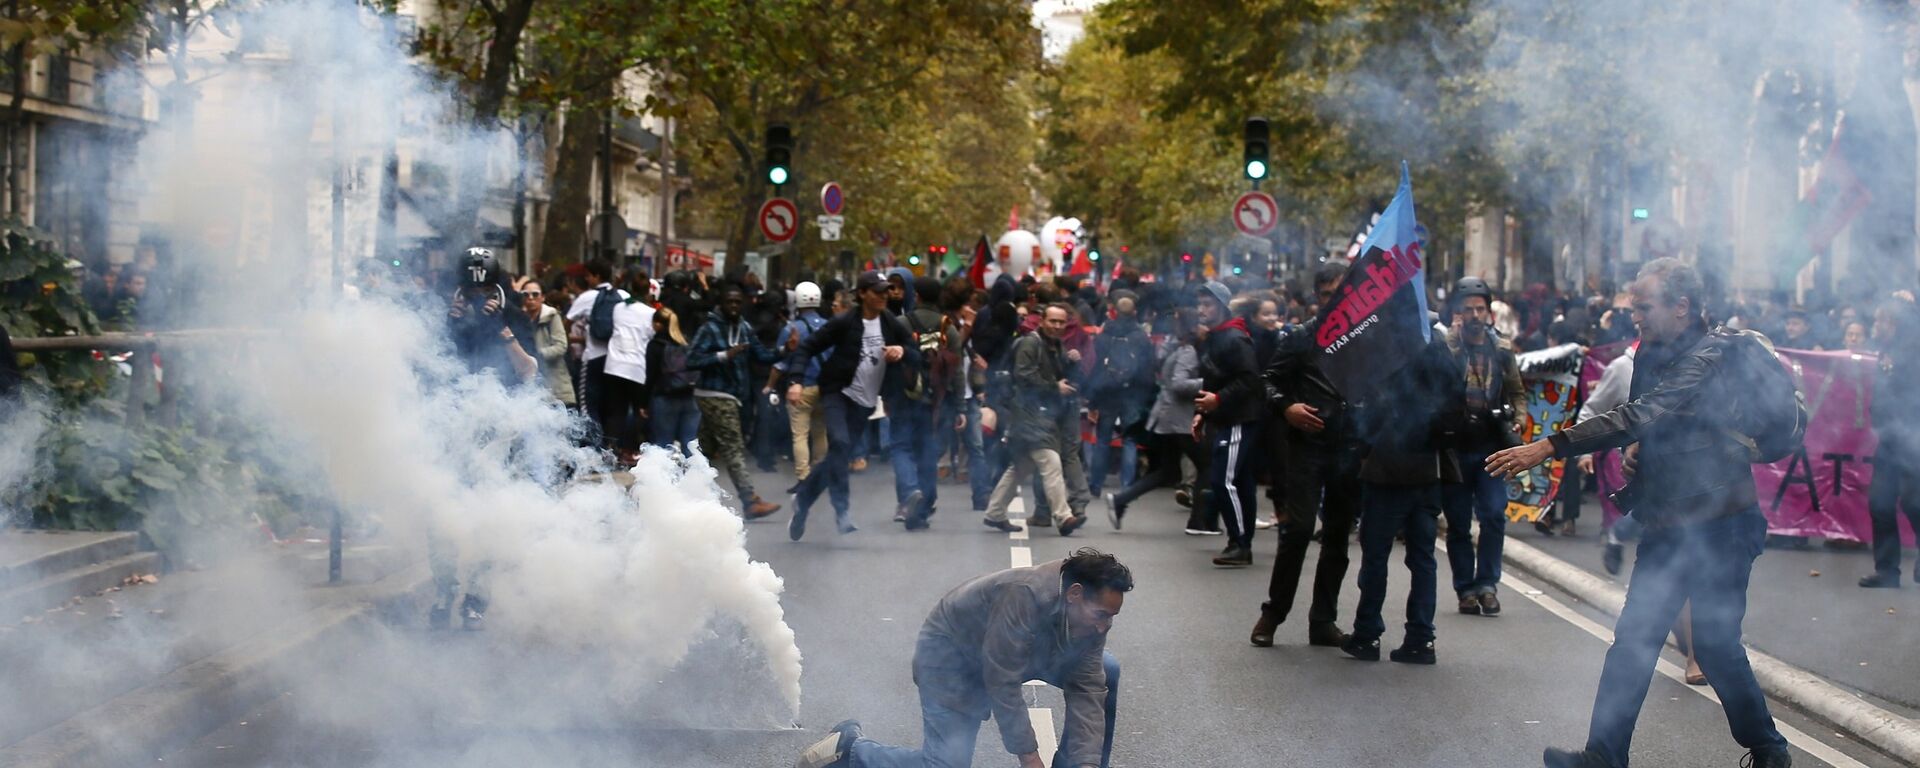 A demonstrators kneels though tear gas during a protest in Paris - 俄羅斯衛星通訊社, 1920, 01.05.2021